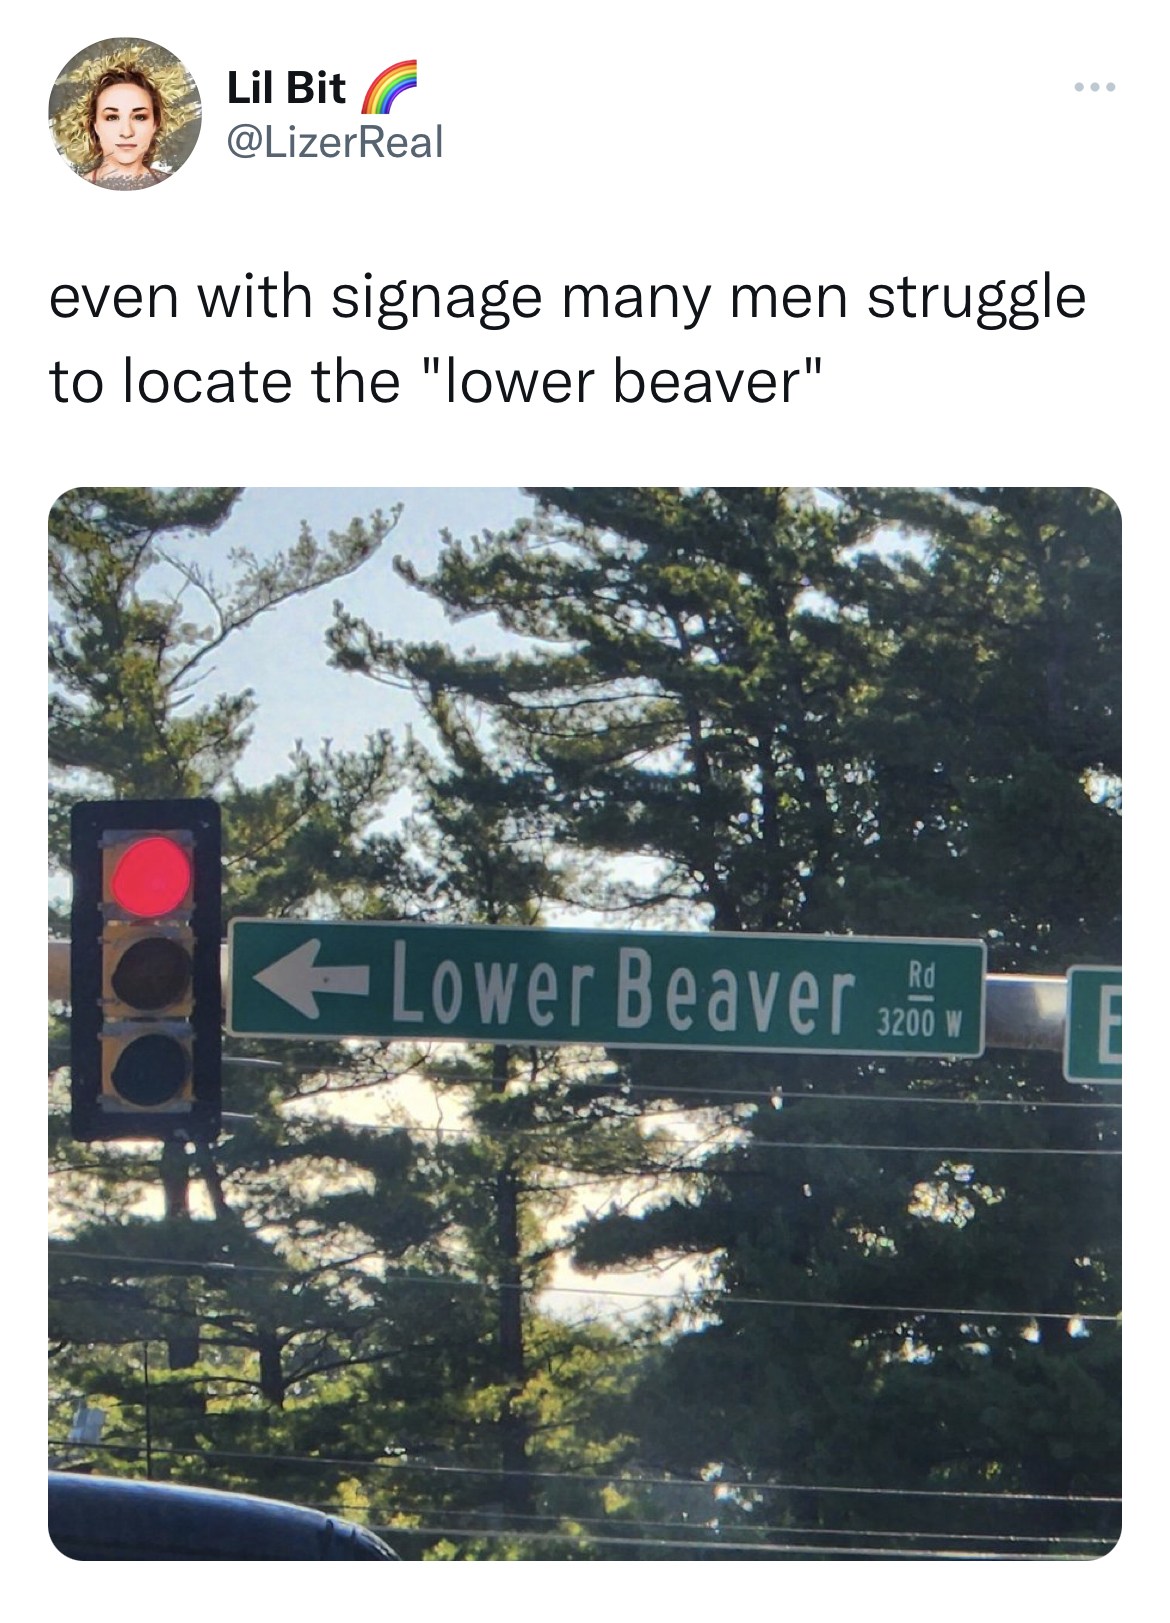 savage and funny tweets - tree - Lil Bit even with signage many men struggle to locate the "lower beaver" Lower Beaver 3200 W